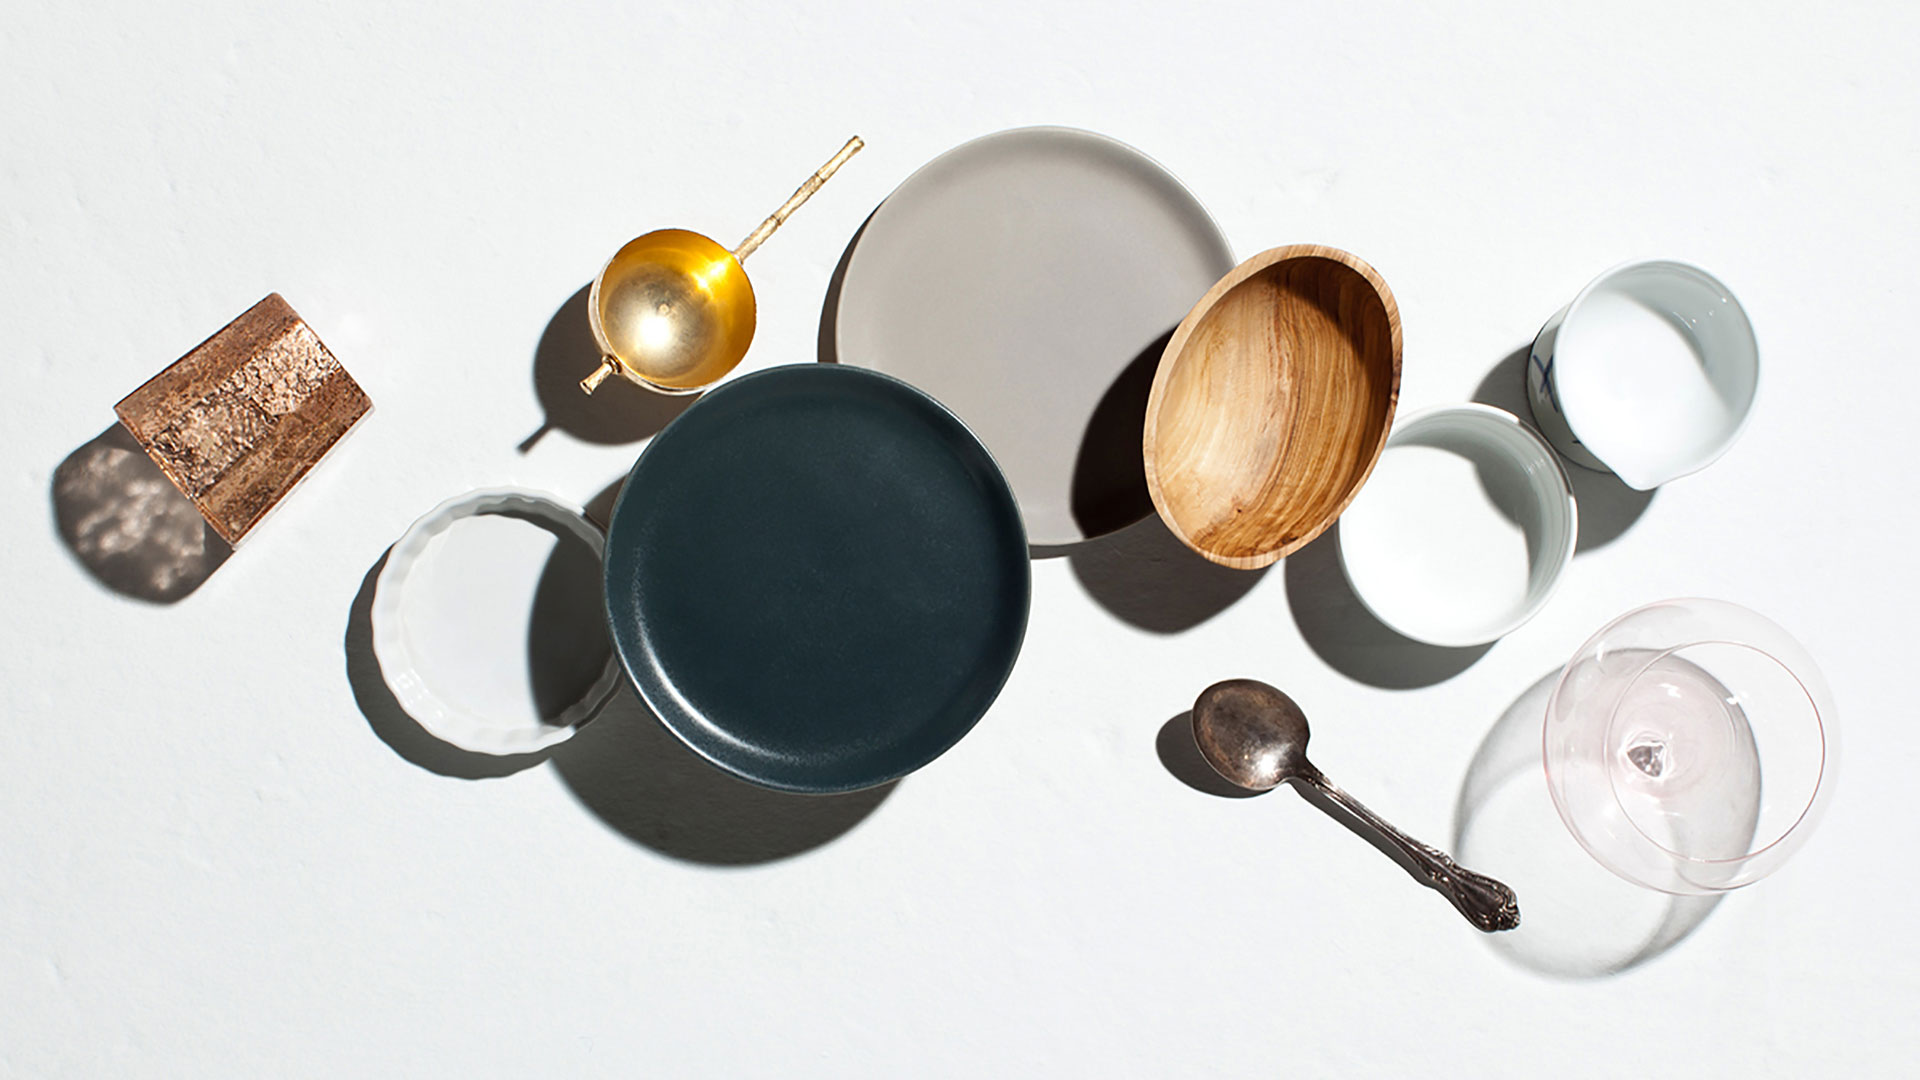 Styled overhead of plates and dishware photographed by professional food and beverage photographer Kate Benson.